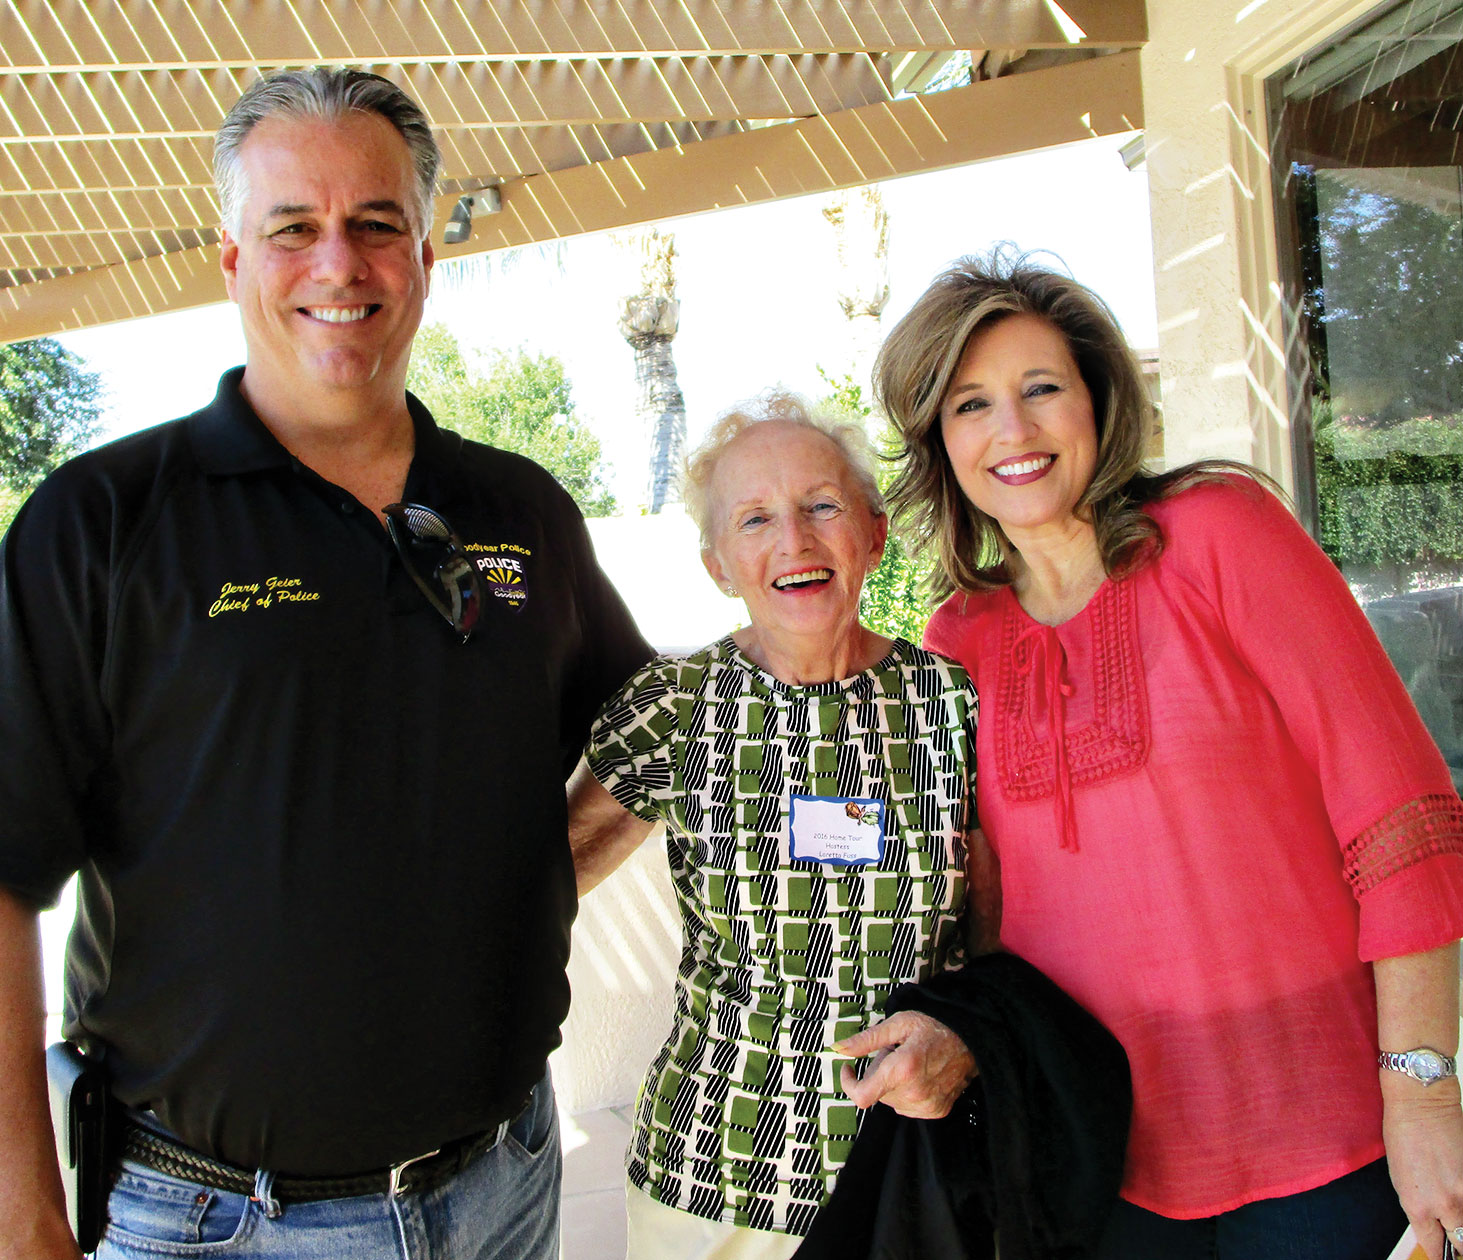 Left to right: Goodyear Chief of Police Jerry Geier, Hostesses Loretta Fuss and Shari Geier at the 20th annual PebbleCreek Home and Garden Tour